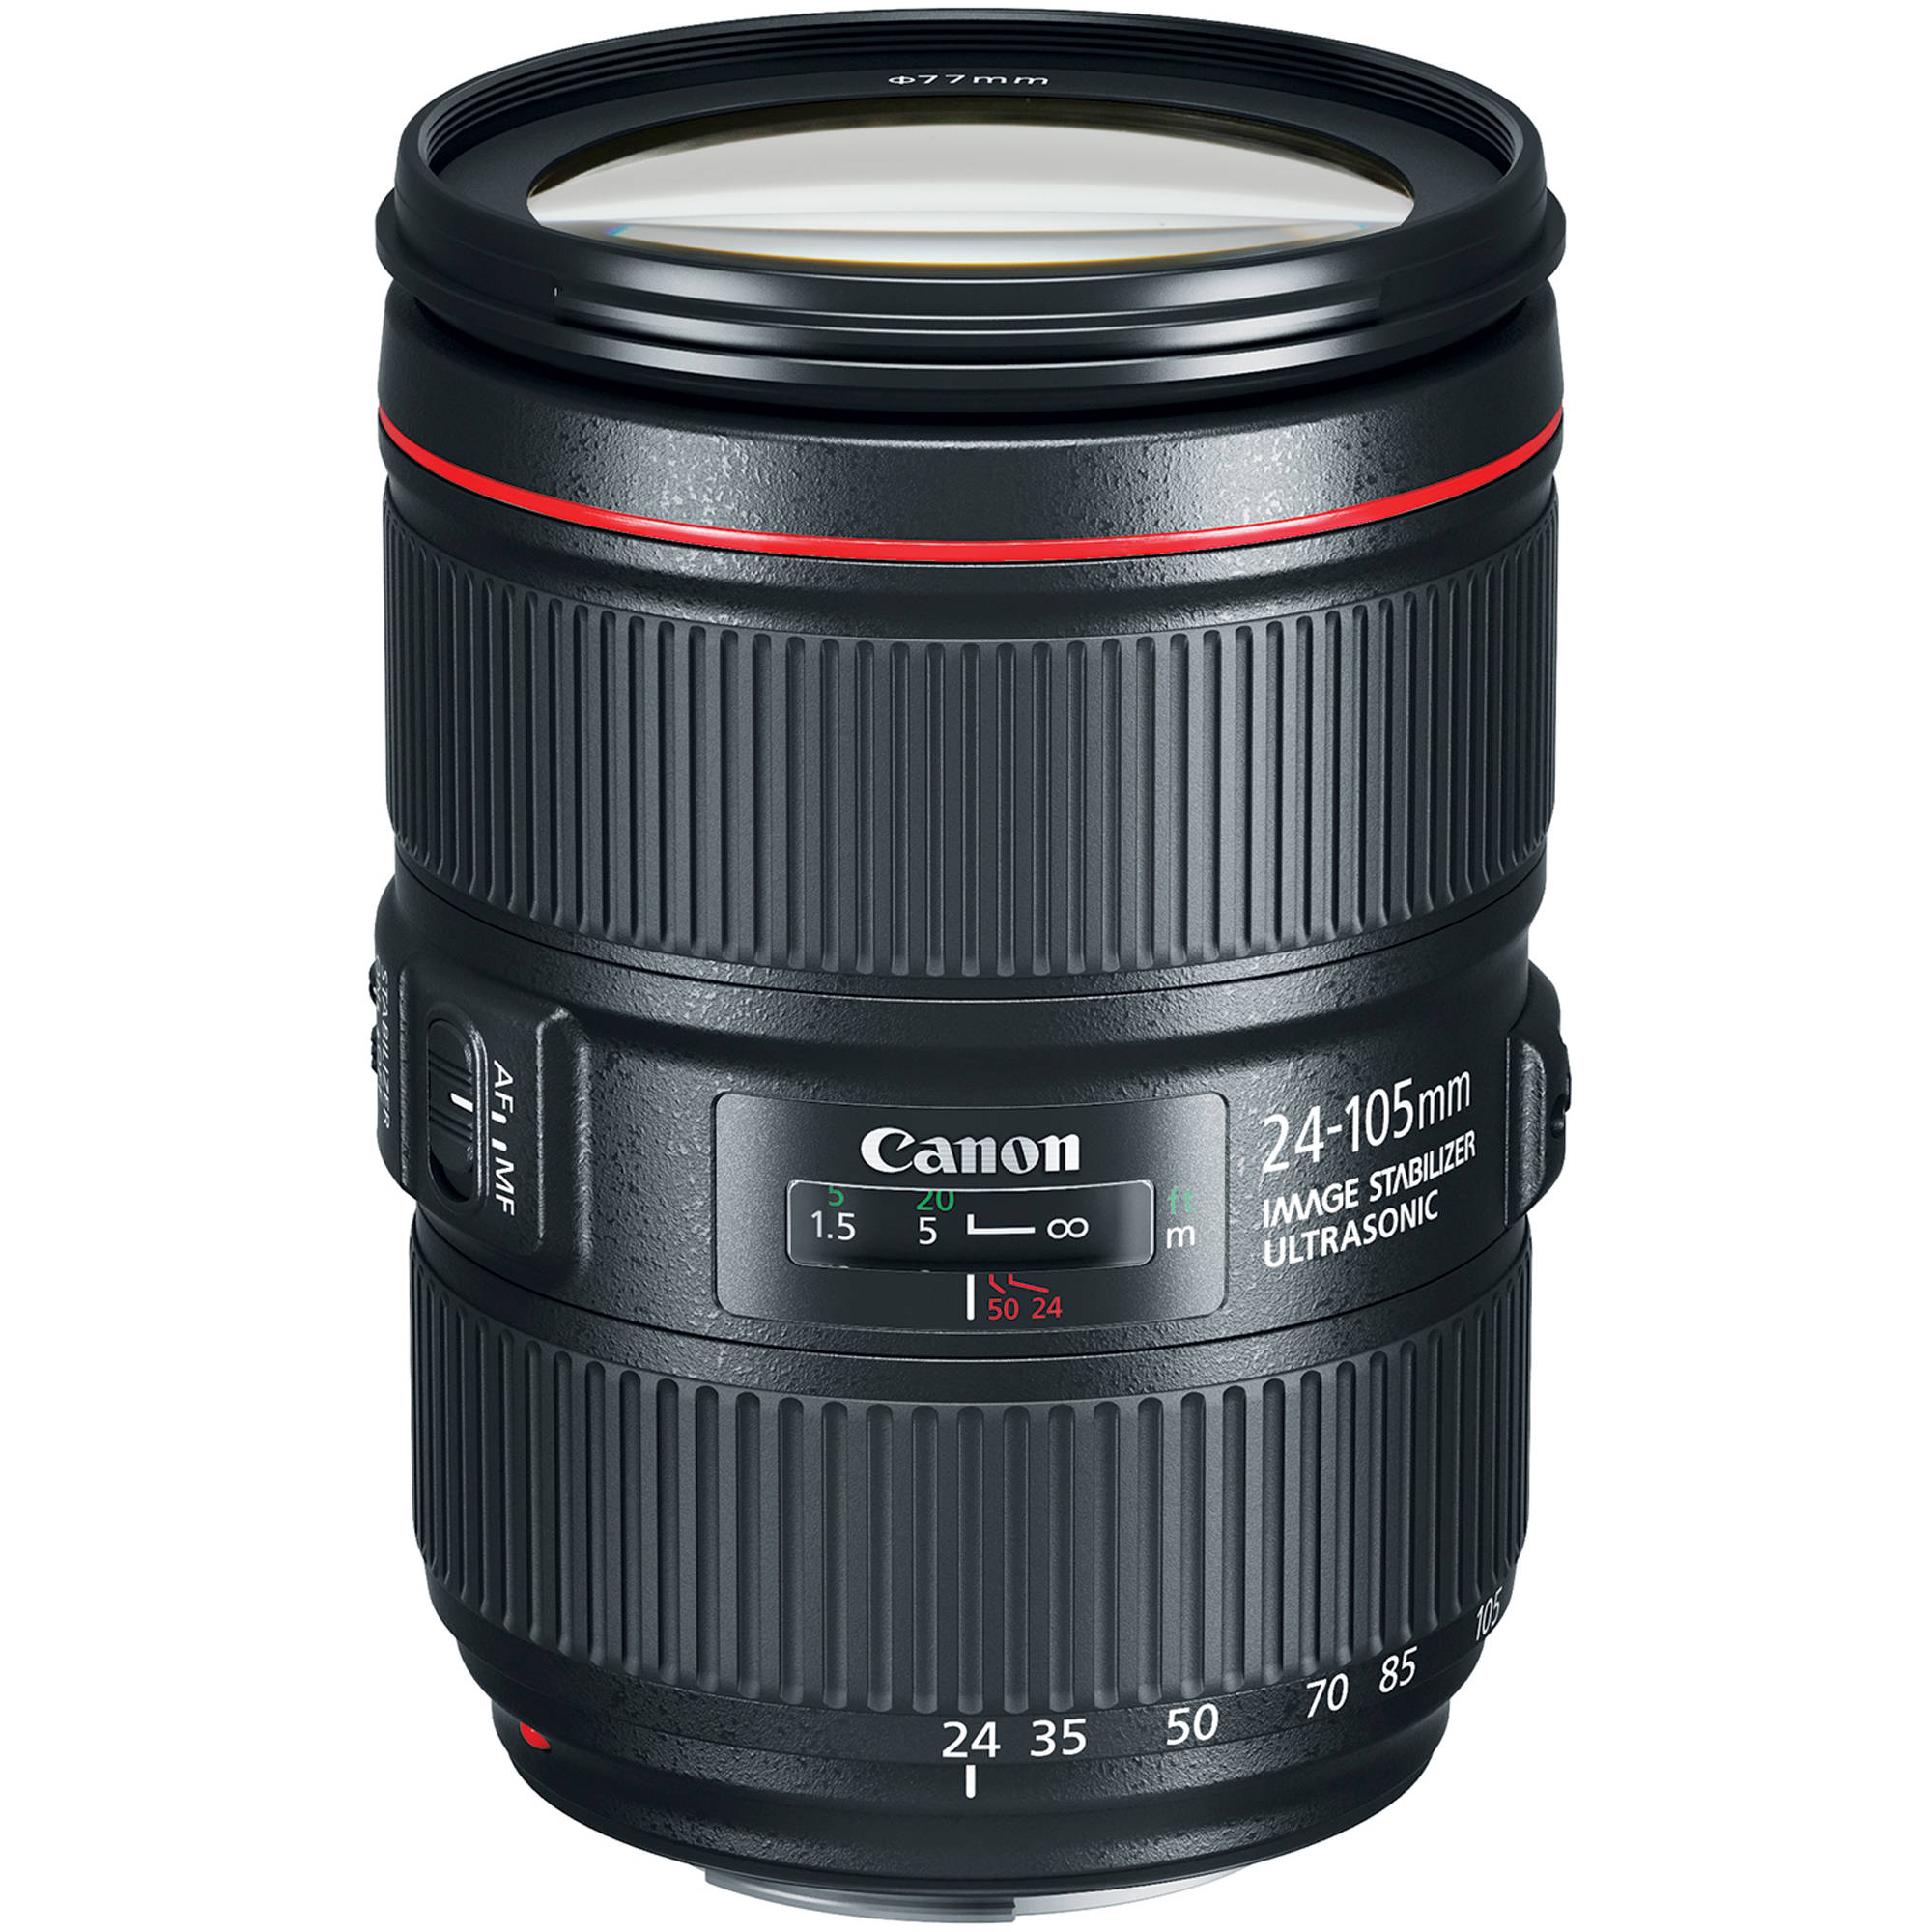 Canon 24-105mm f4 L Isii